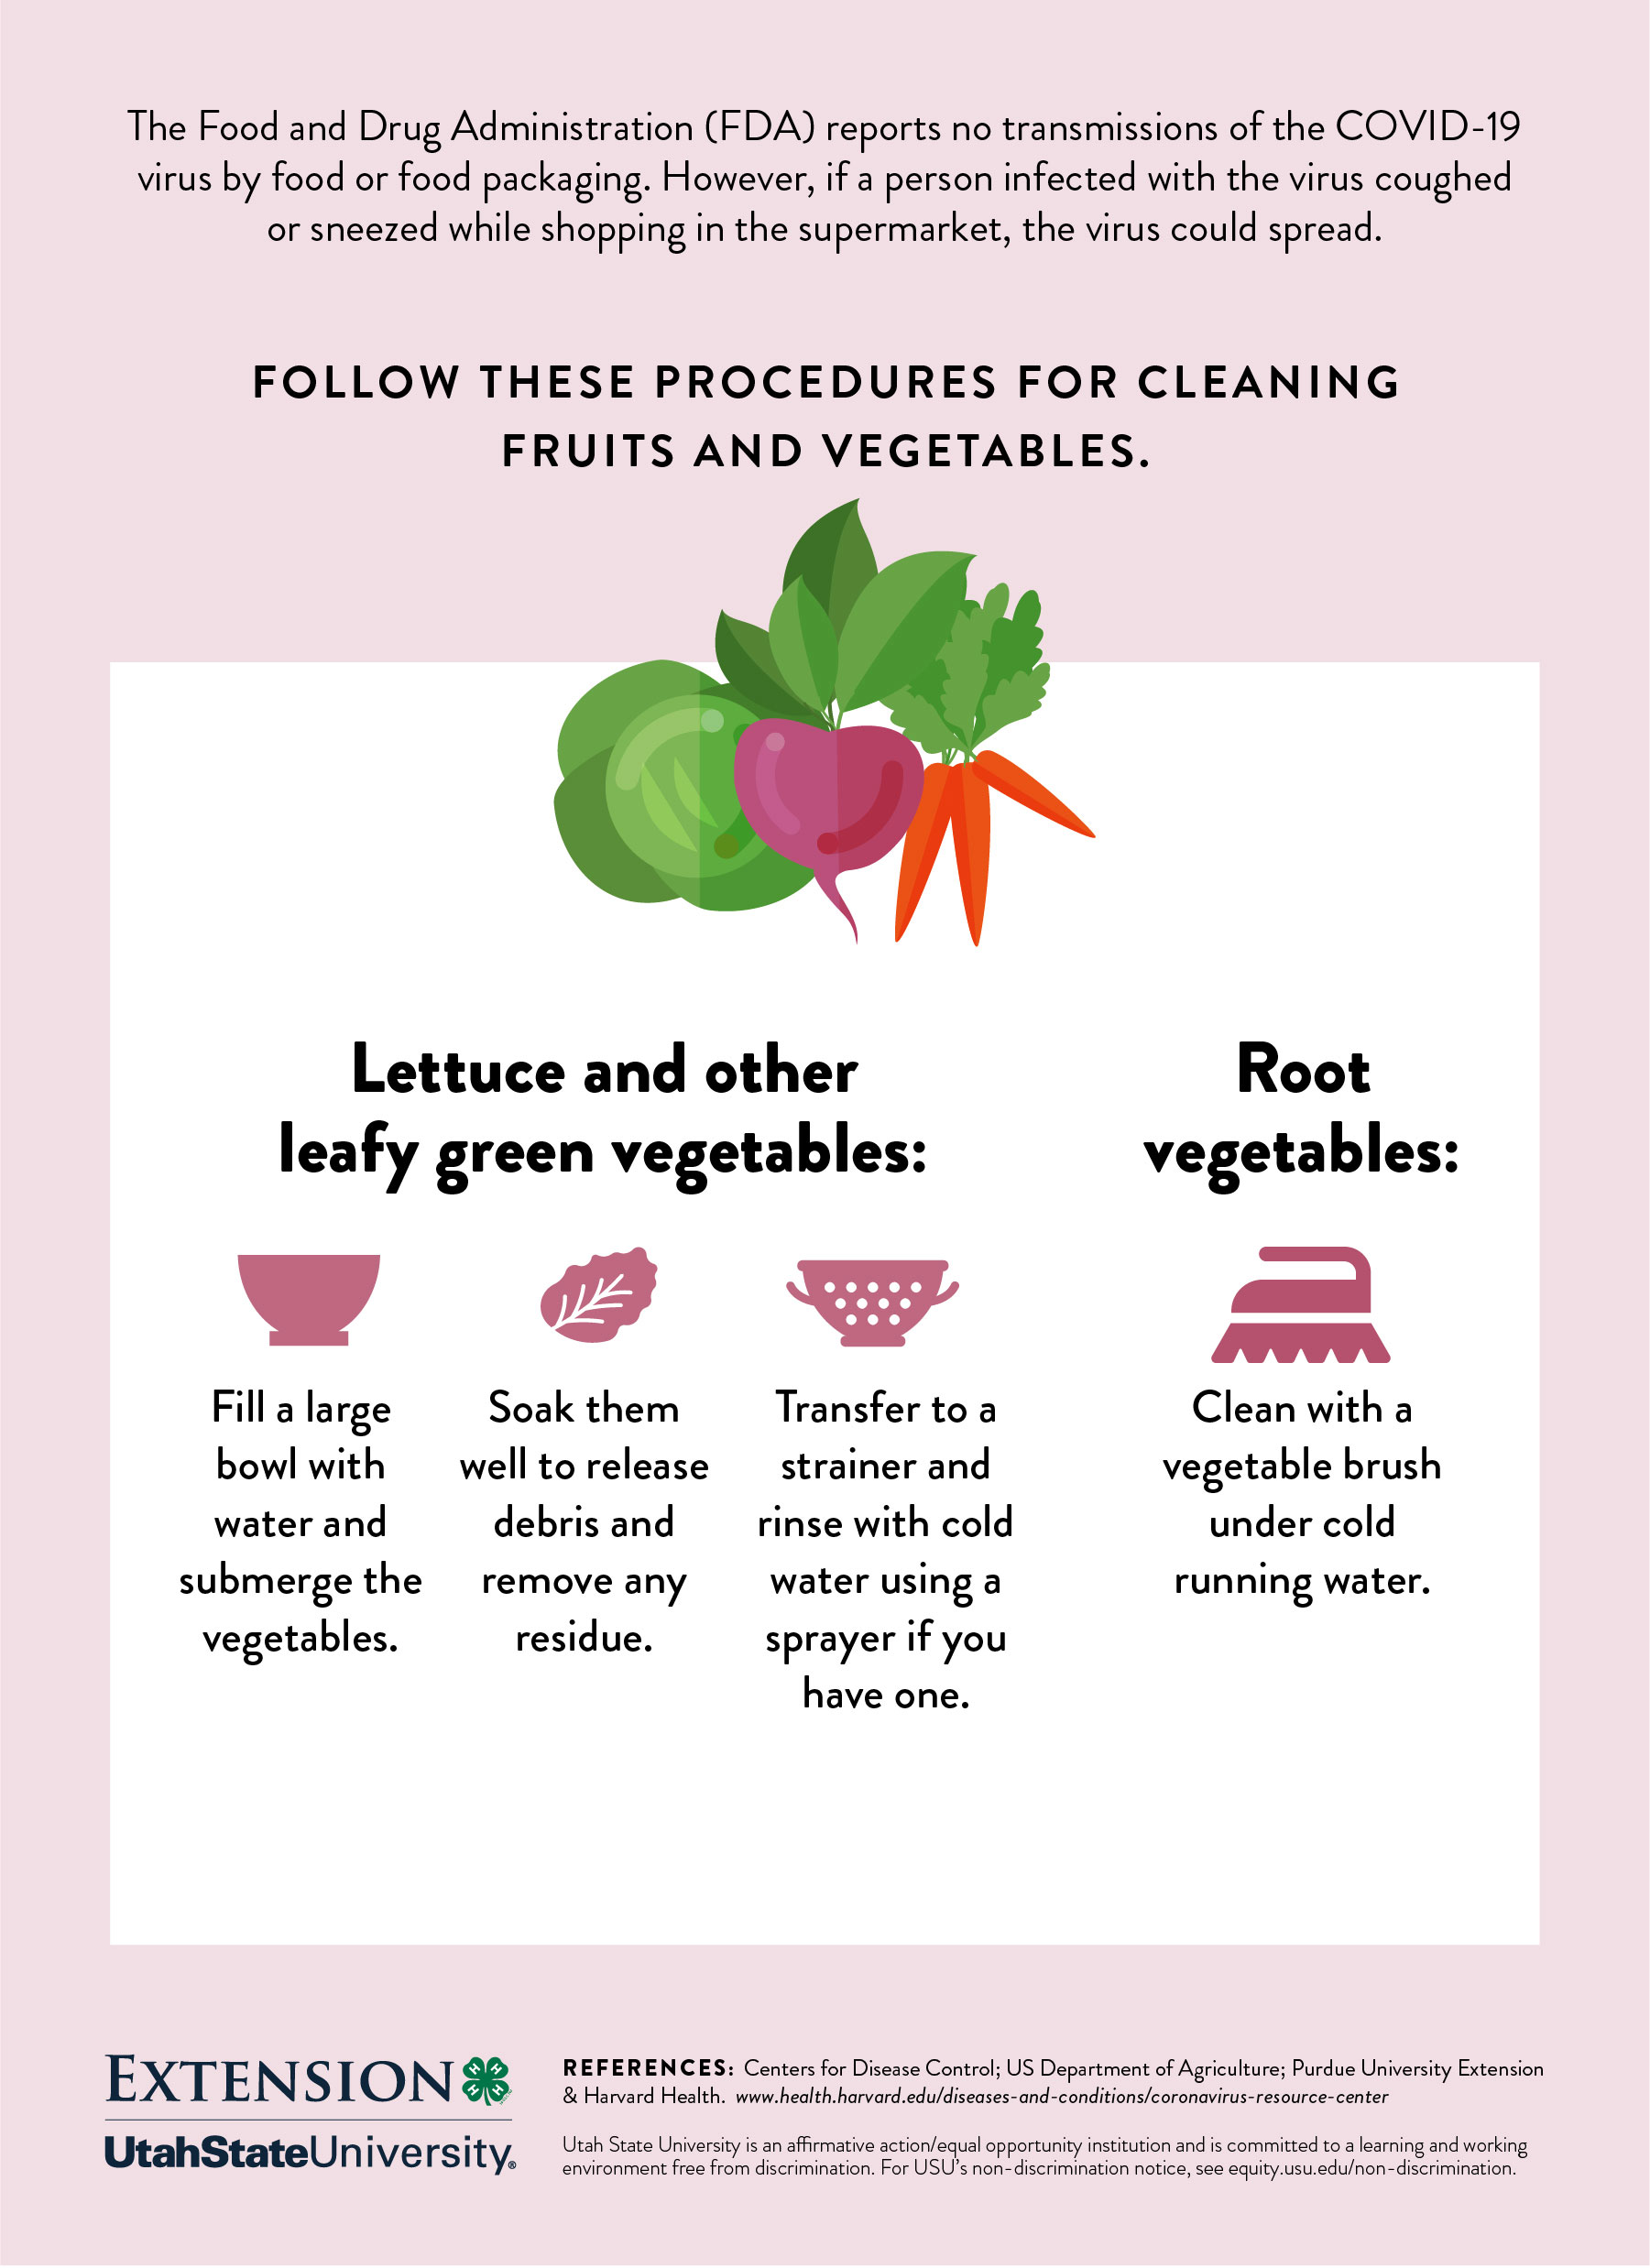 Cleaning other fruits and veggies